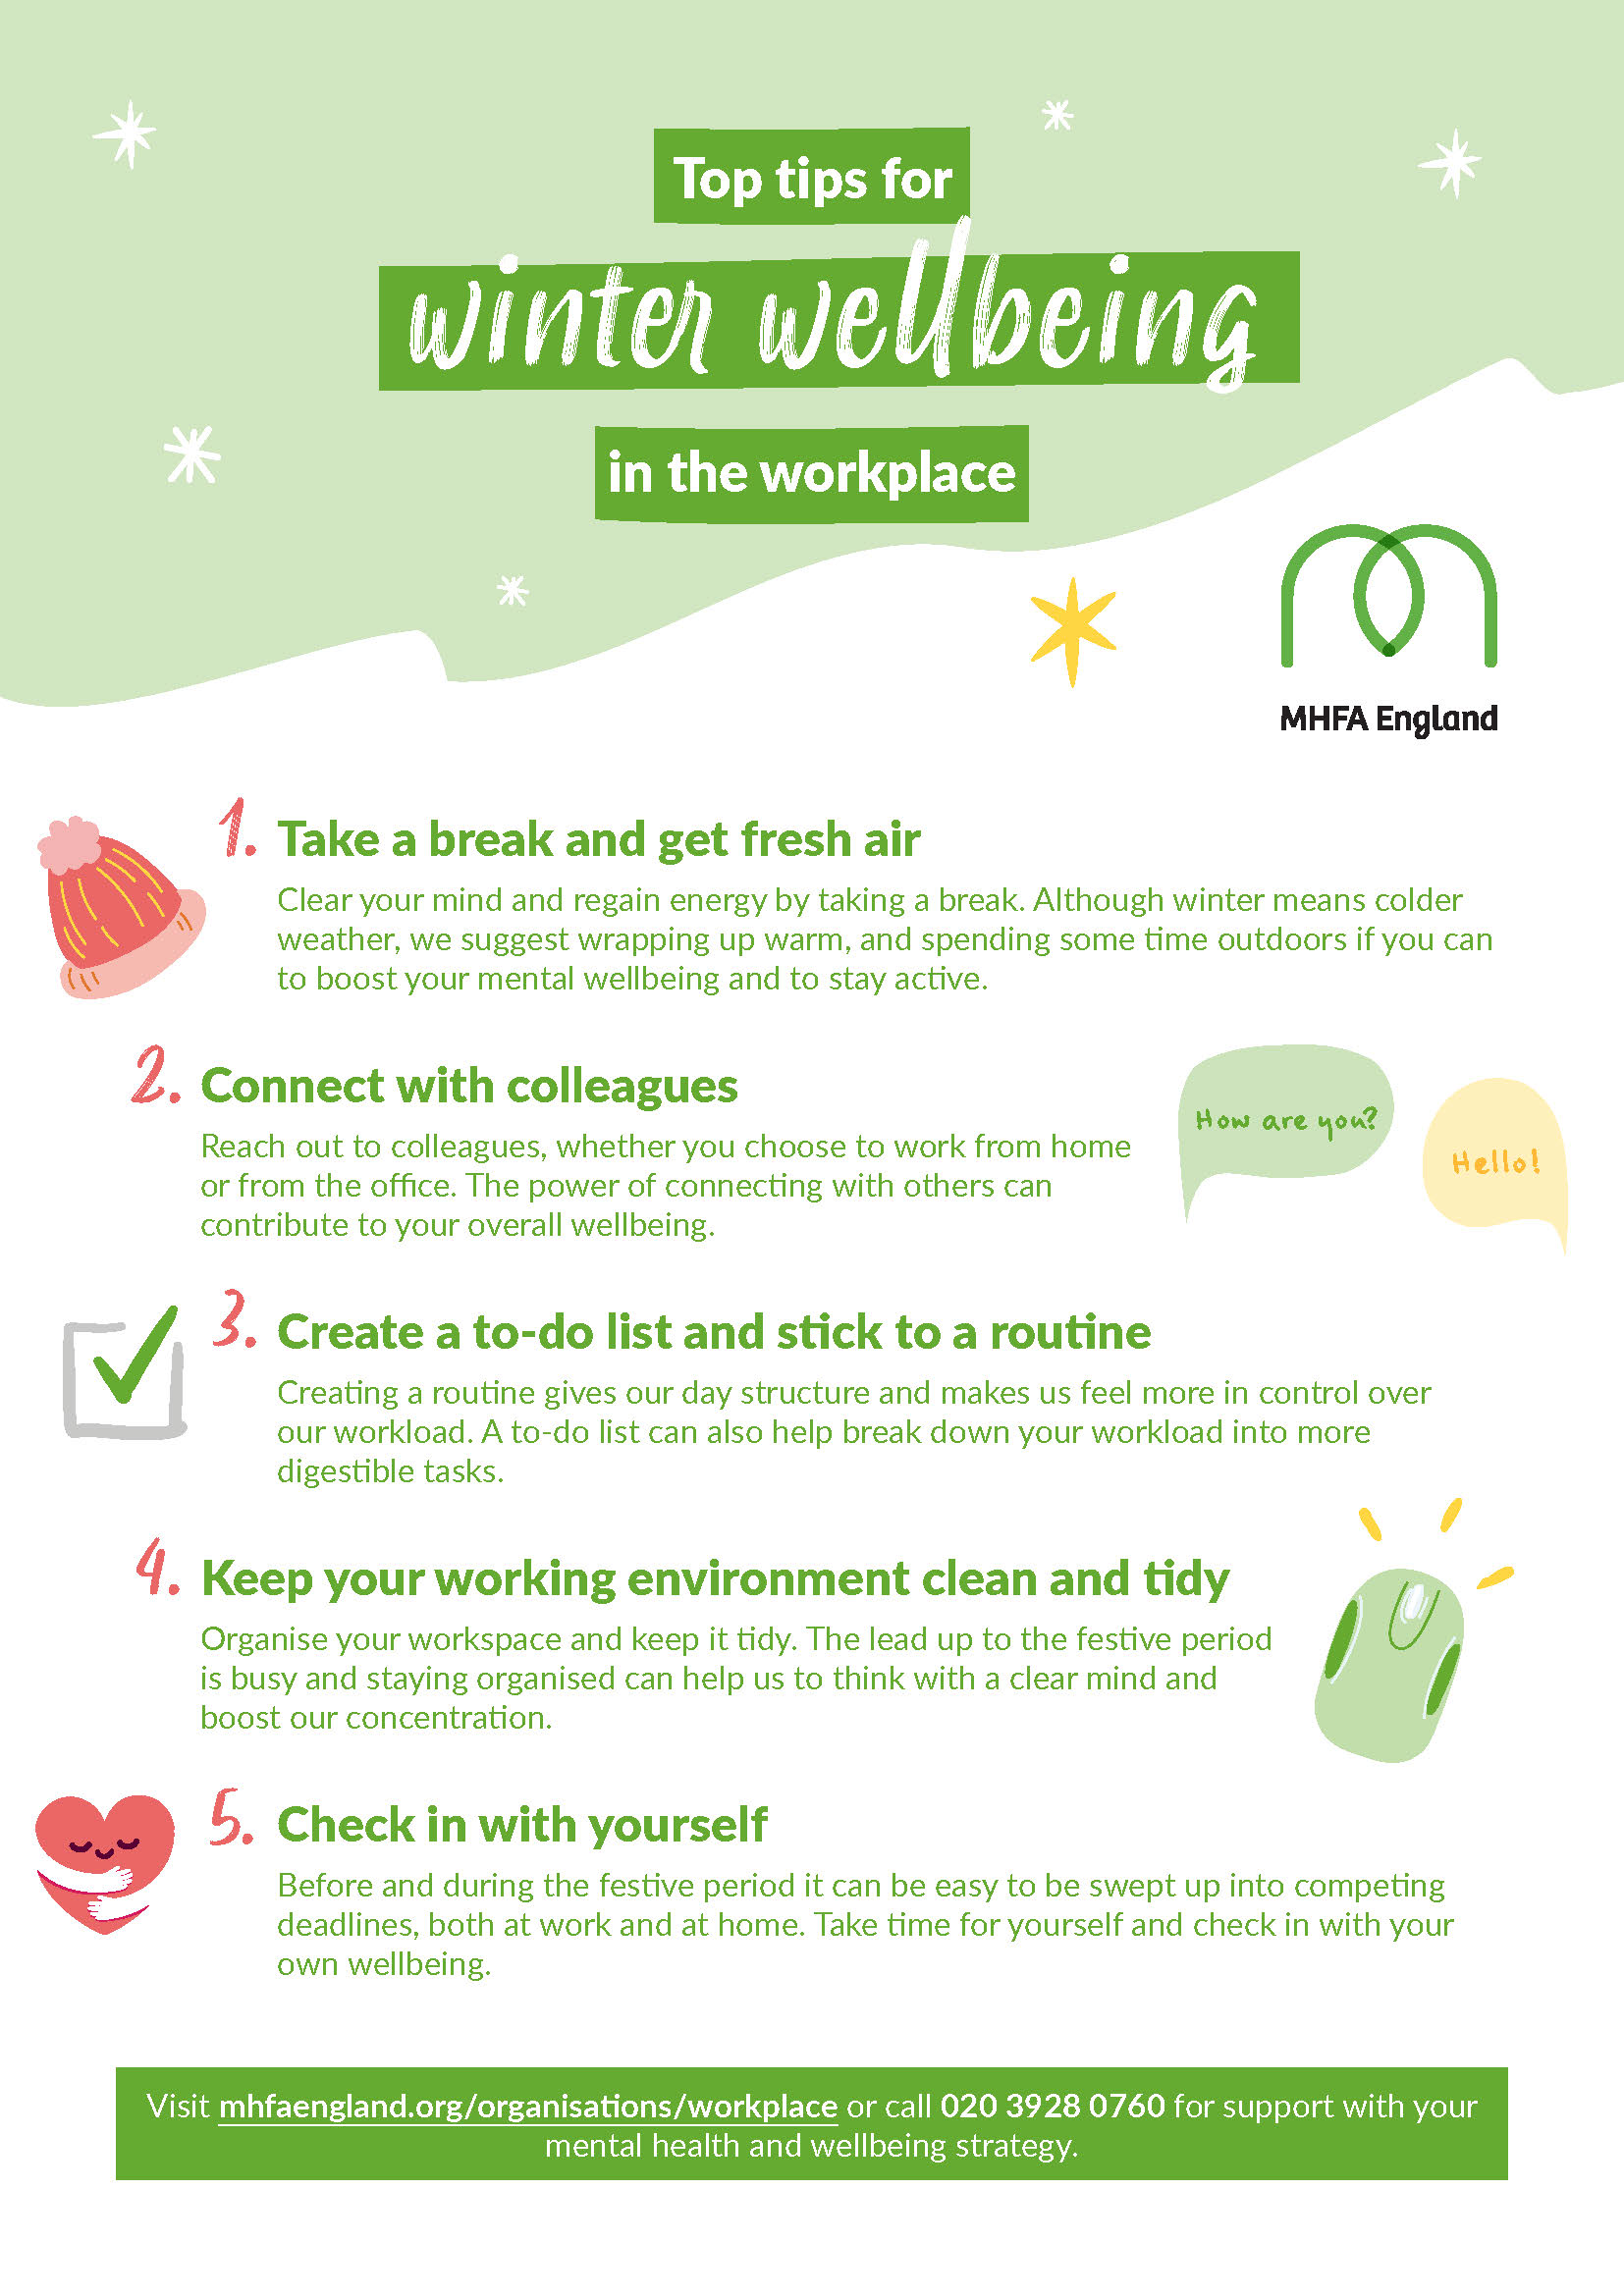 Top tips for winter wellbeing in the workplace